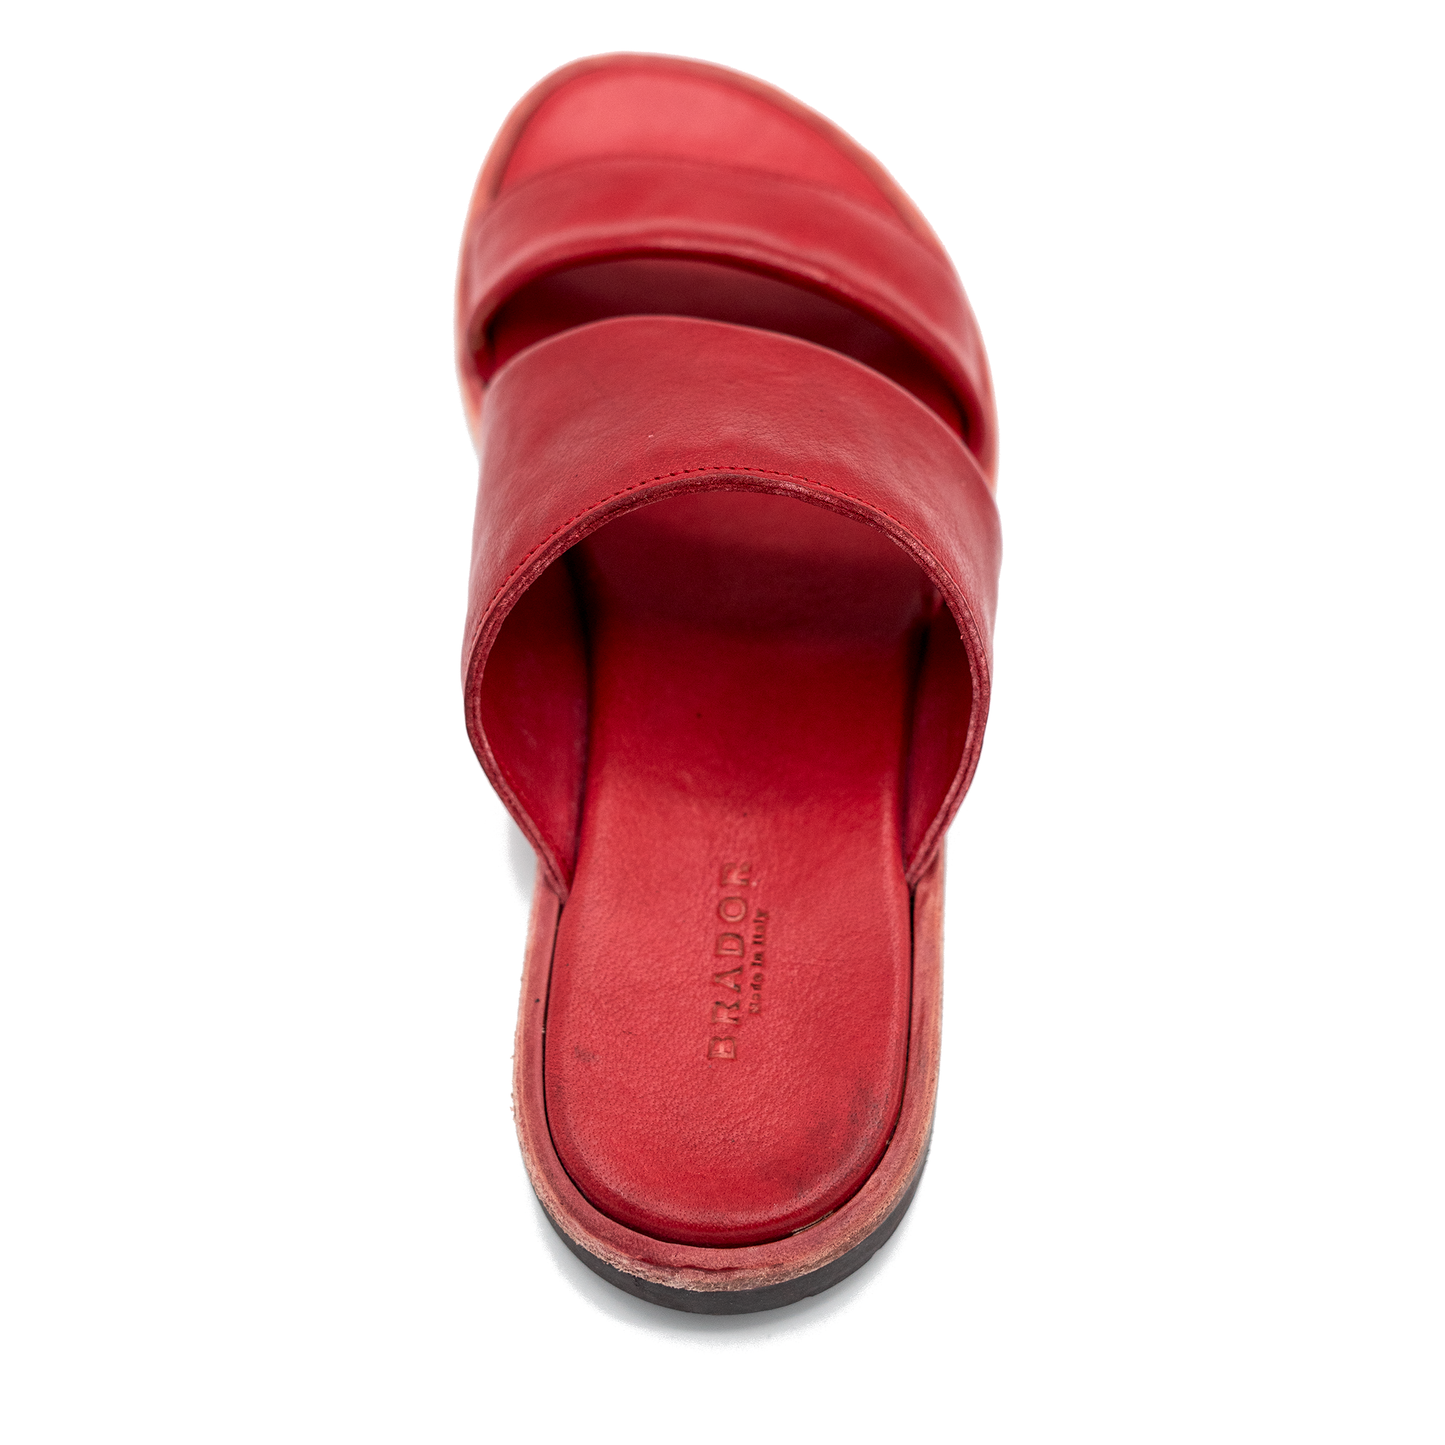 Panama Leather Sandals in Rosso